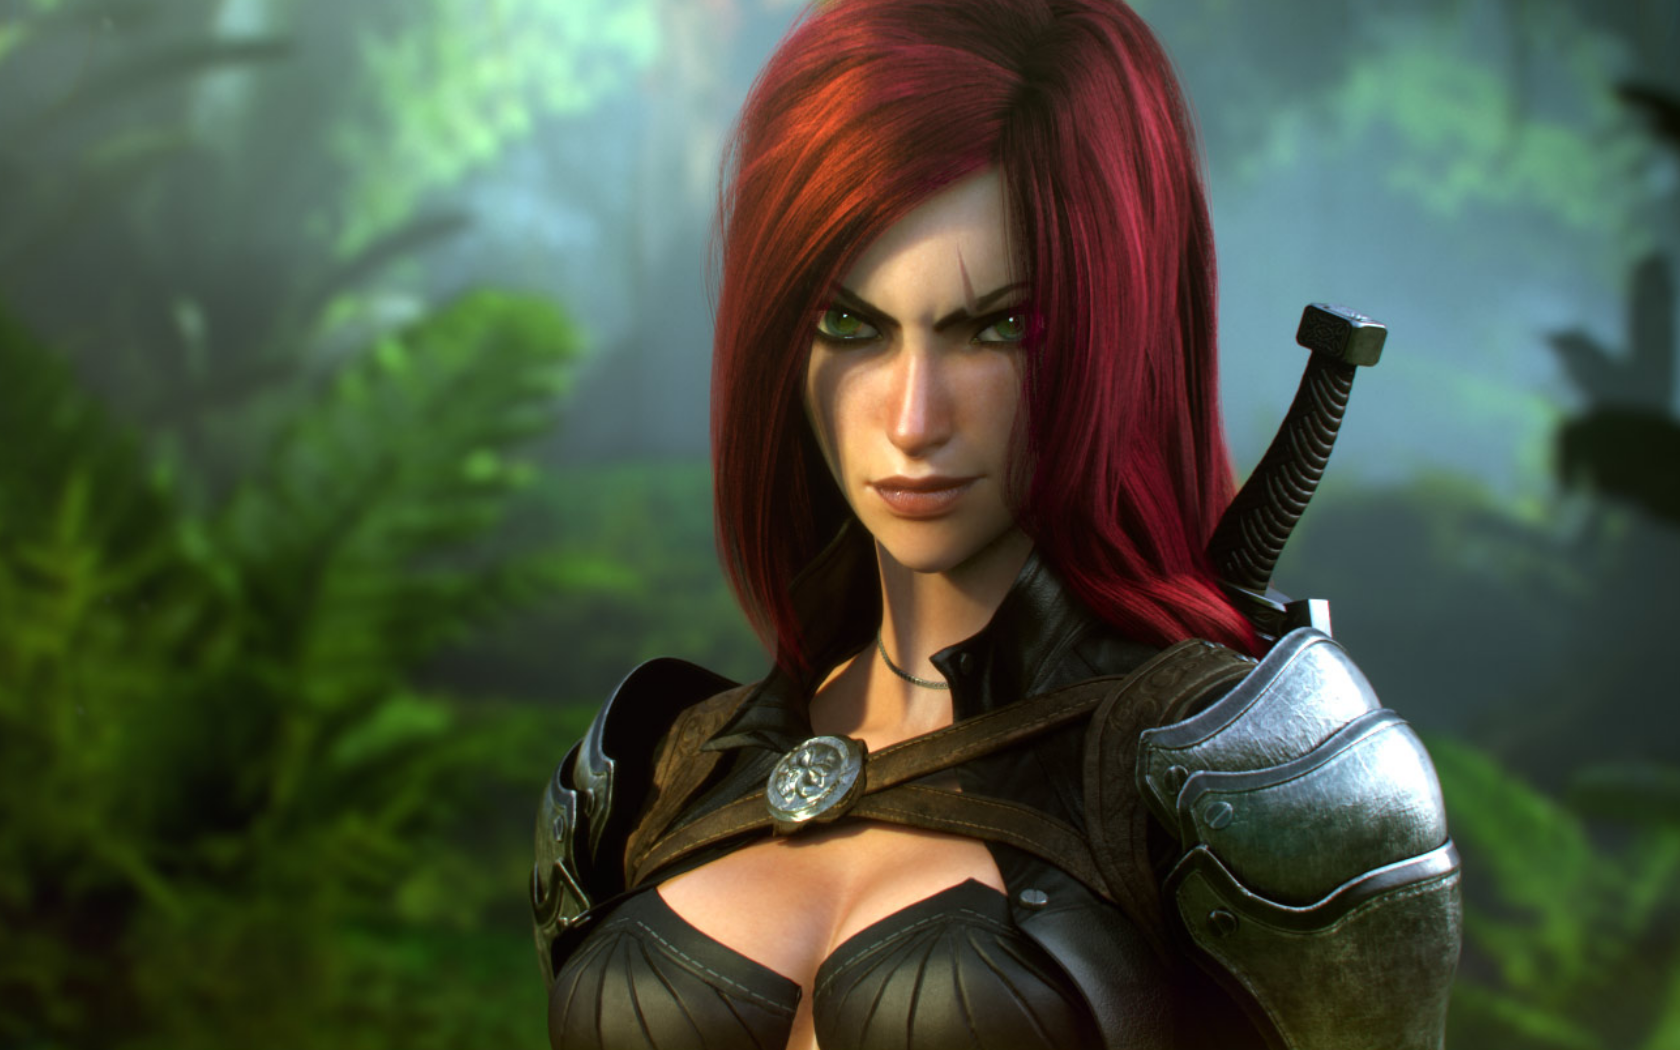 General 1680x1050 League of Legends video games fantasy girl Katarina (League of Legends) looking at viewer redhead PC gaming video game art video game girls boobs women video game characters fantasy art long hair face portrait green eyes